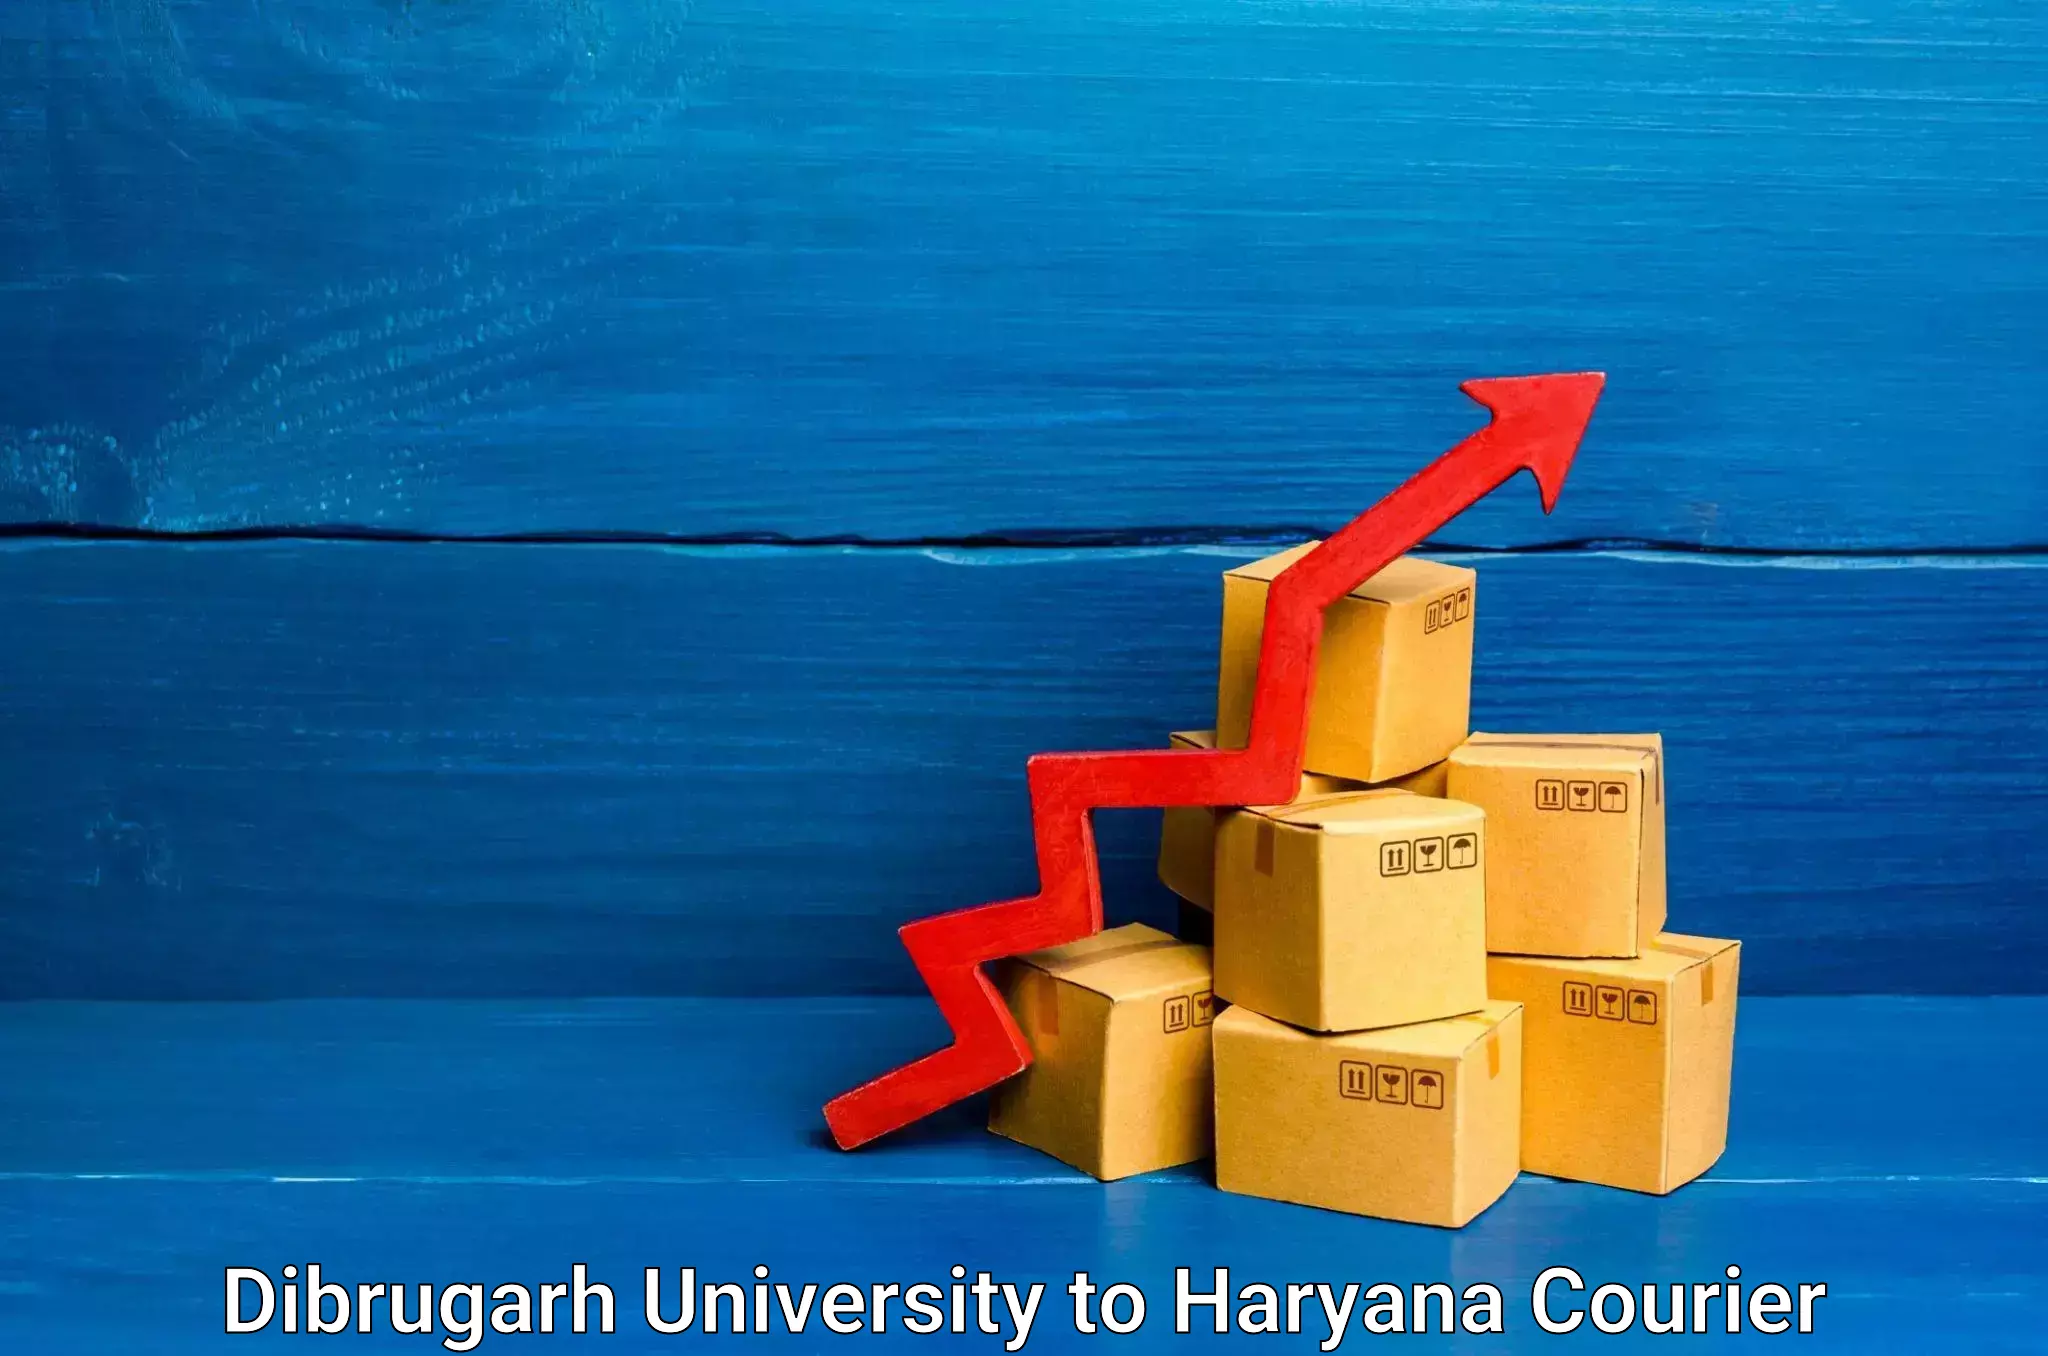 Trackable shipping service Dibrugarh University to Gurgaon